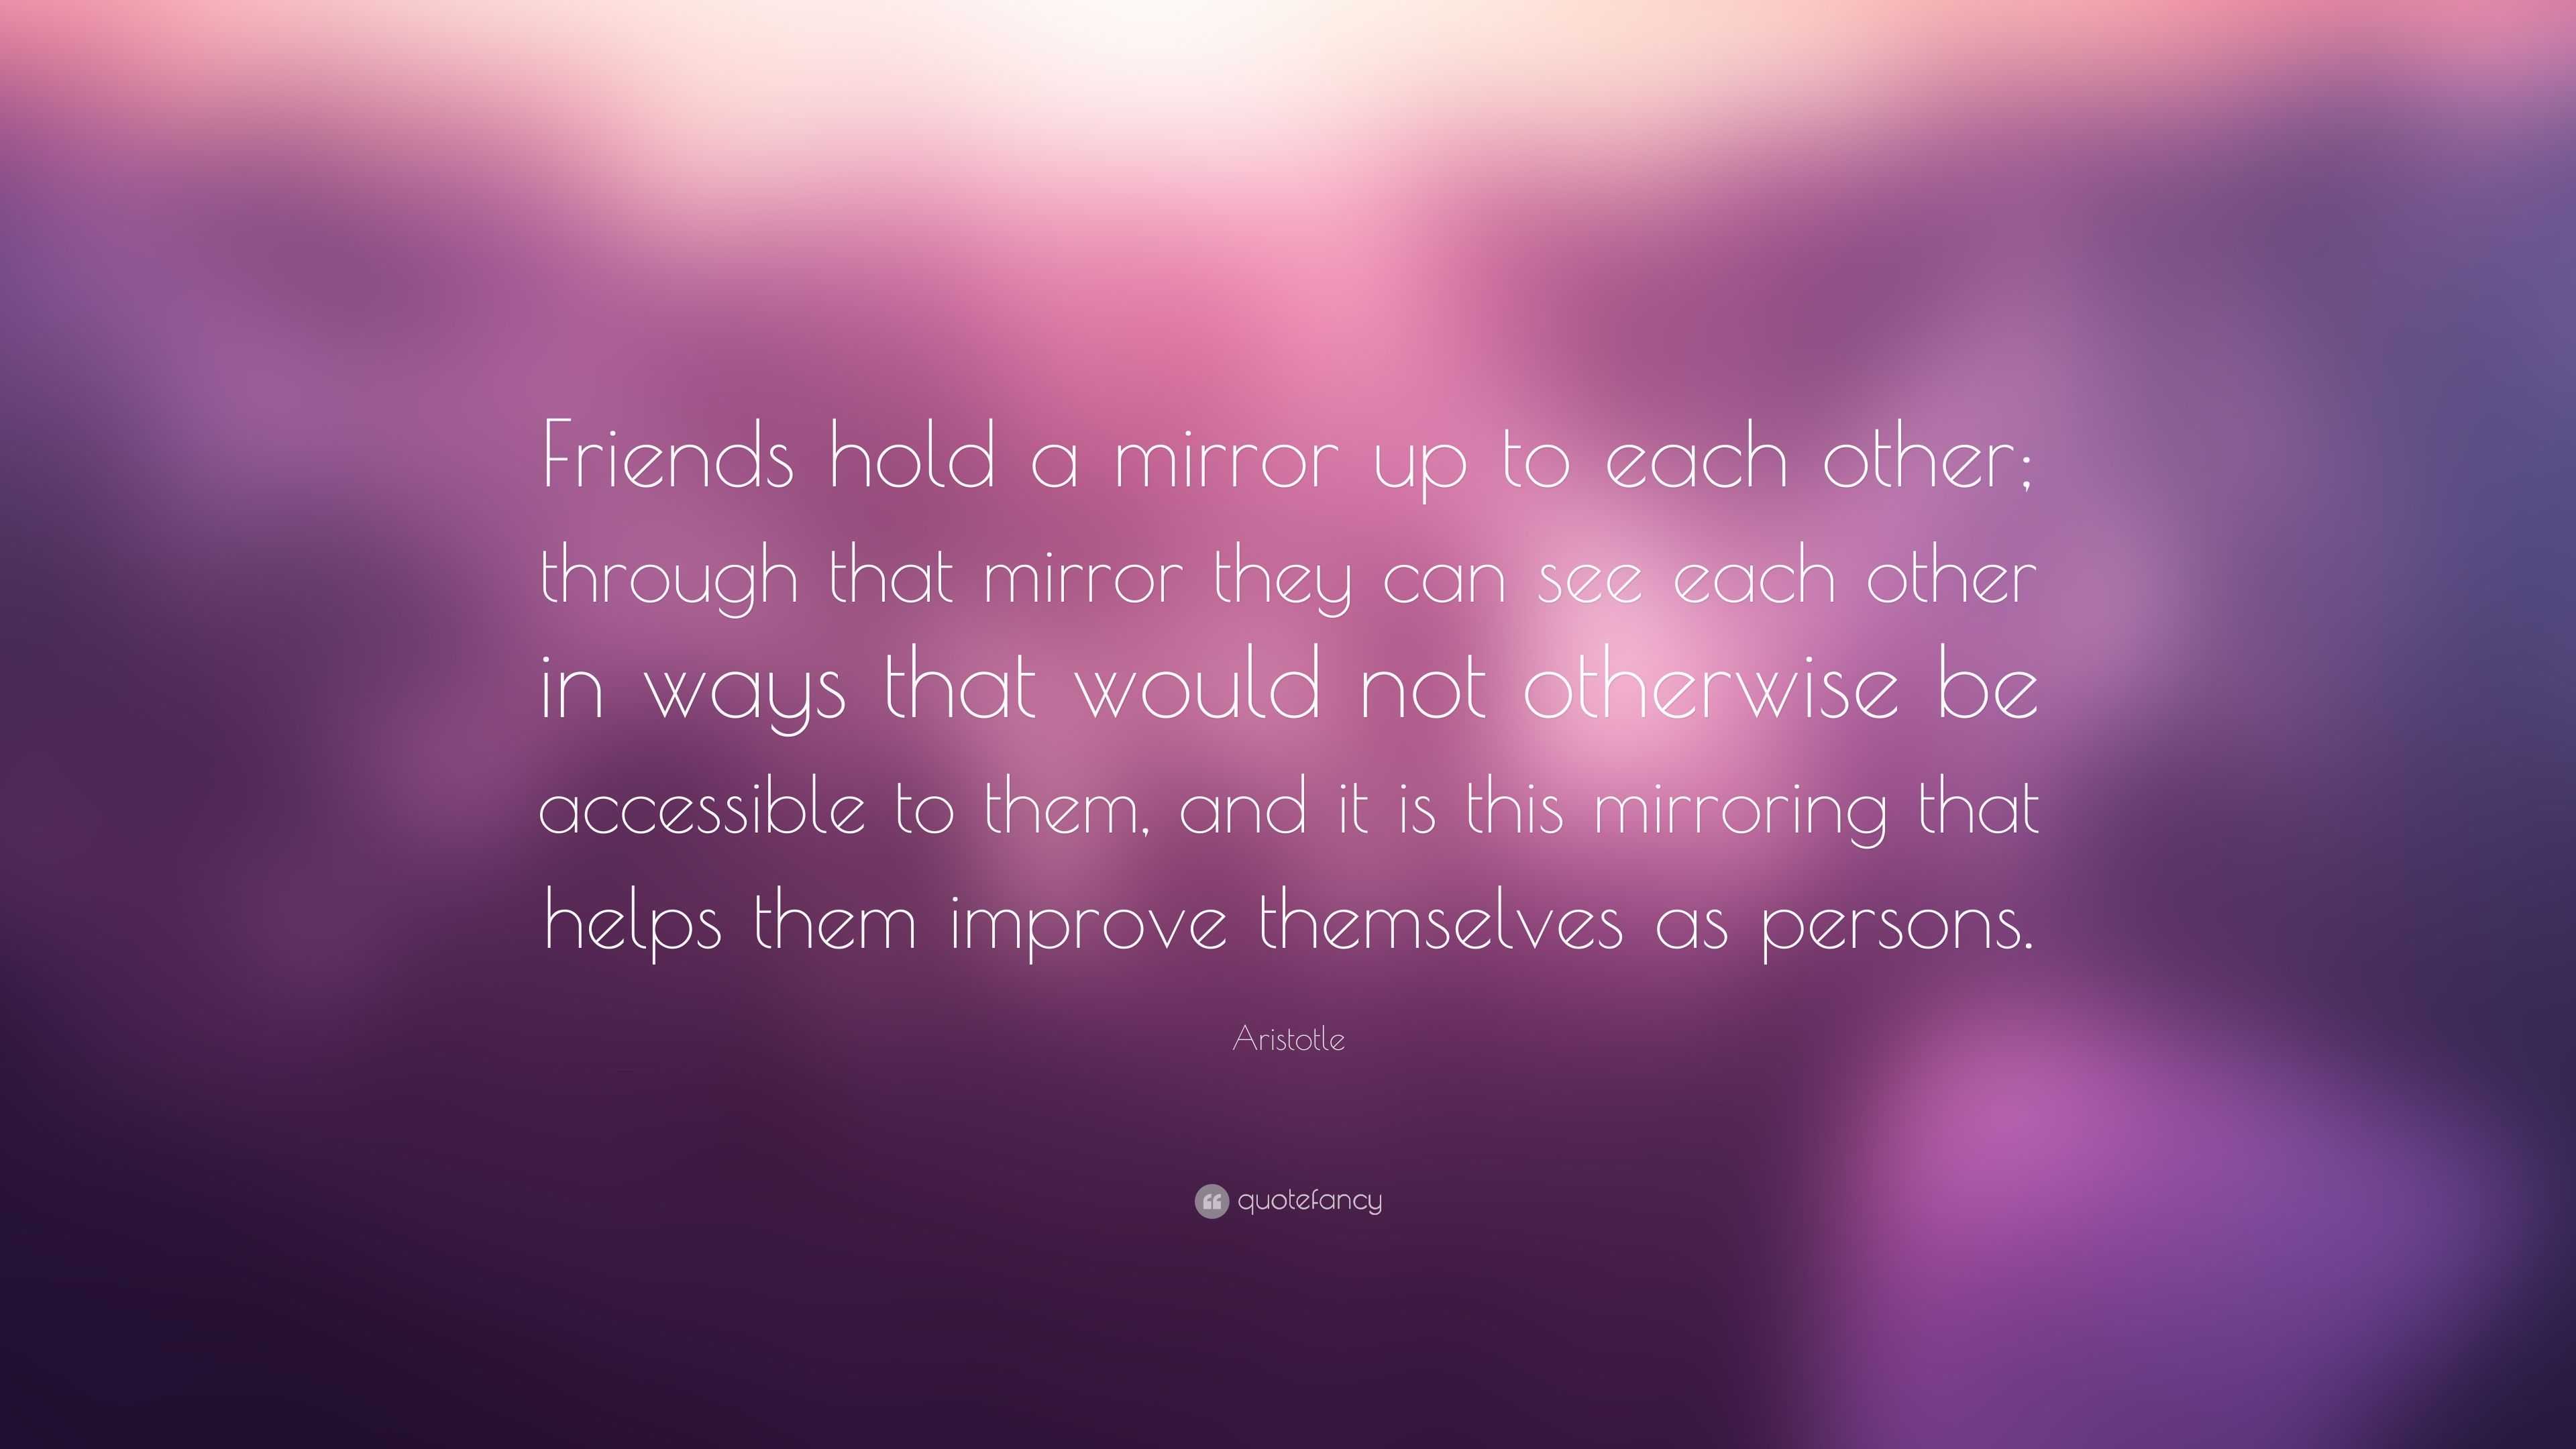 Aristotle Quote: “Friends hold a mirror up to each other; through that ...